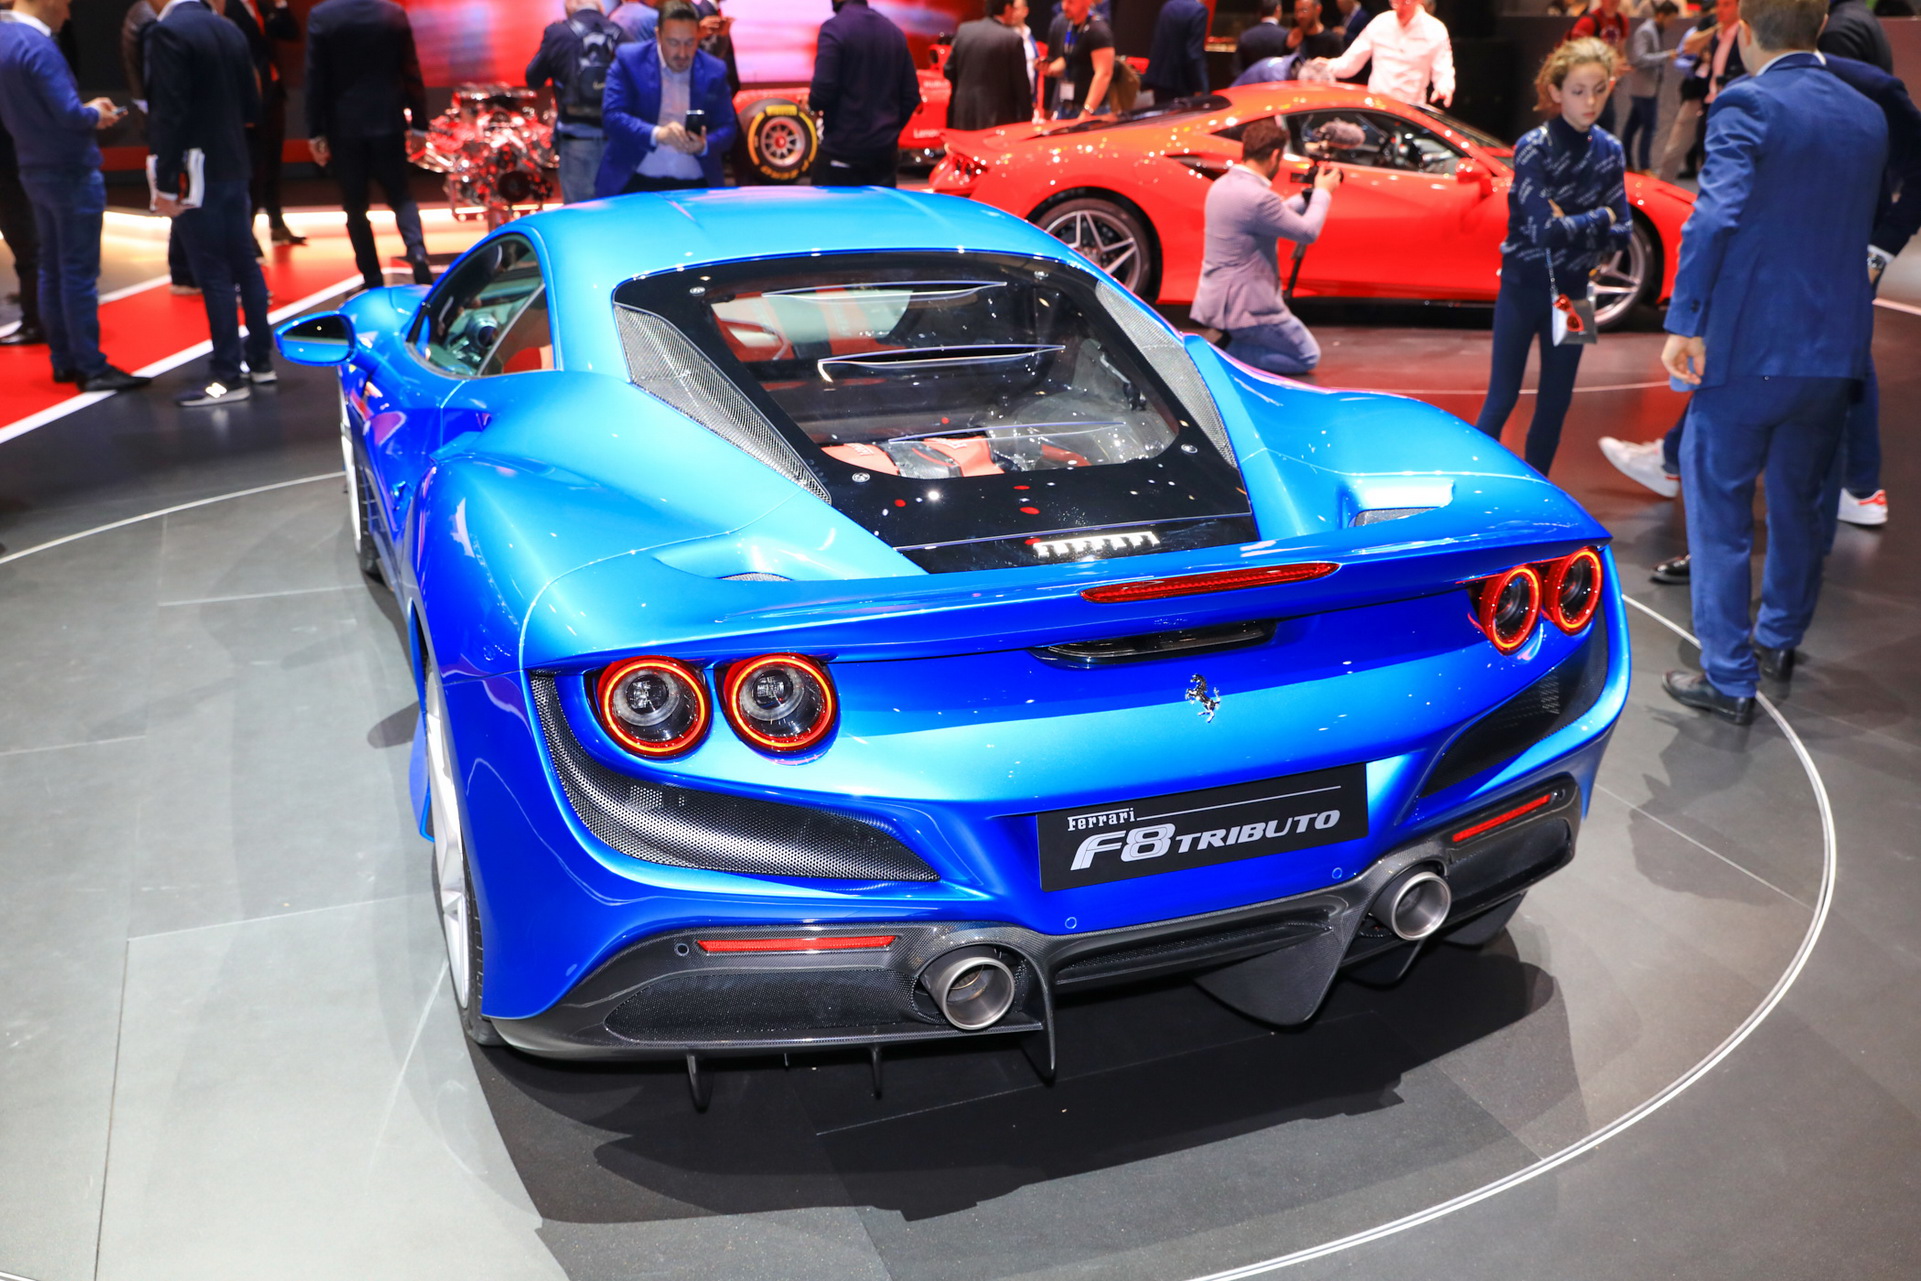 Ferrari F8 Tributo Feast Your Eyes On It In Over 70 Photos Carscoops